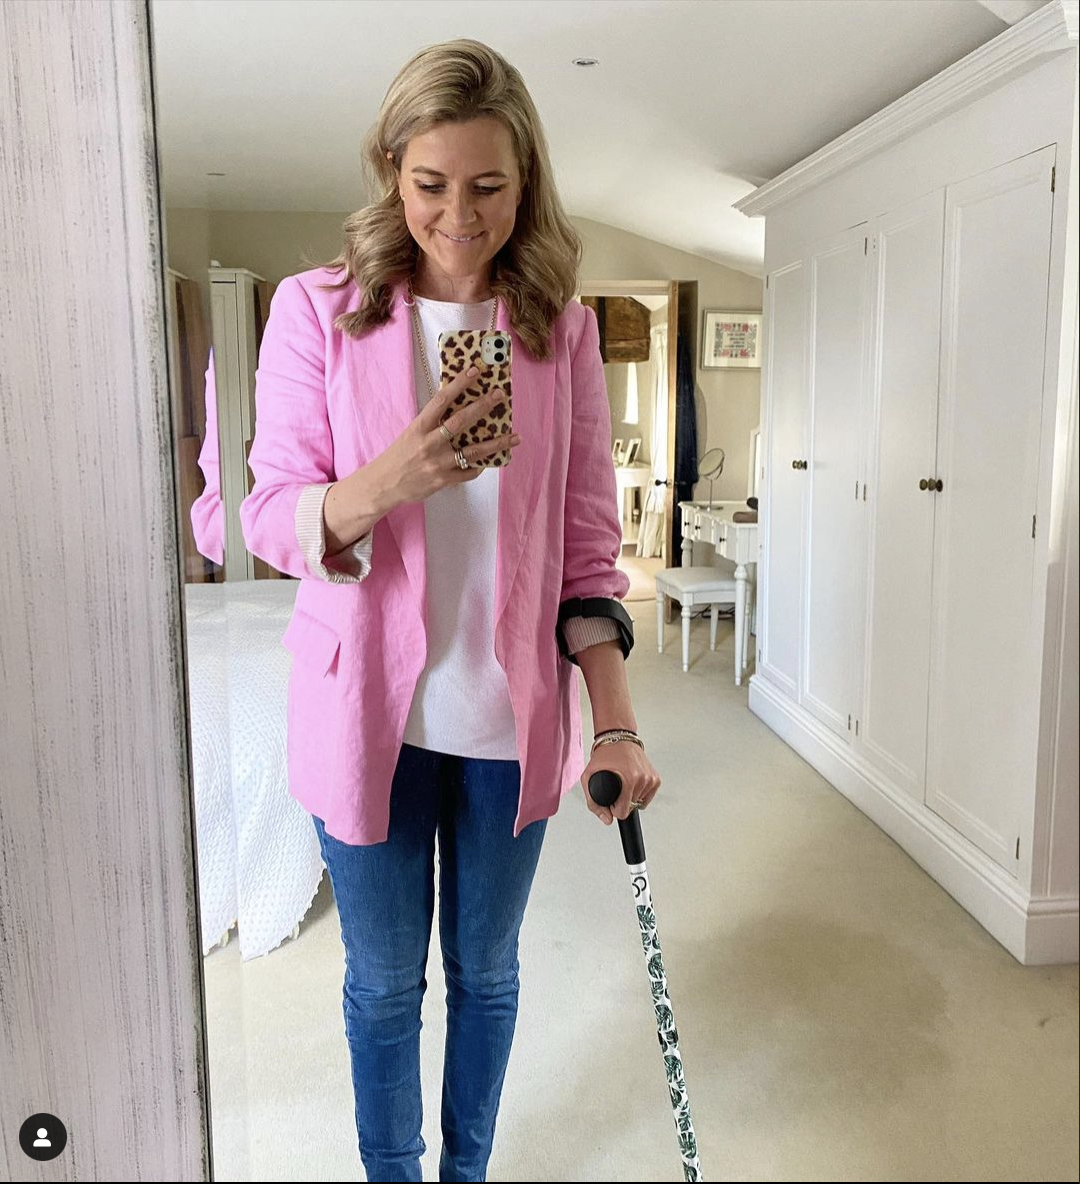 Younger middle aged white woman with shoulder length blonde hair tucked behind her ears. She's smiling while looking at her animal print covered phone held in her right hand which is the left side of the photo. She is wearing a bright pink blazer and blue jeans.  She is using a forearm crutch with her left hand and arm. The crutch has black forearm cuff and handle. The stick part is white with a green leaf design.